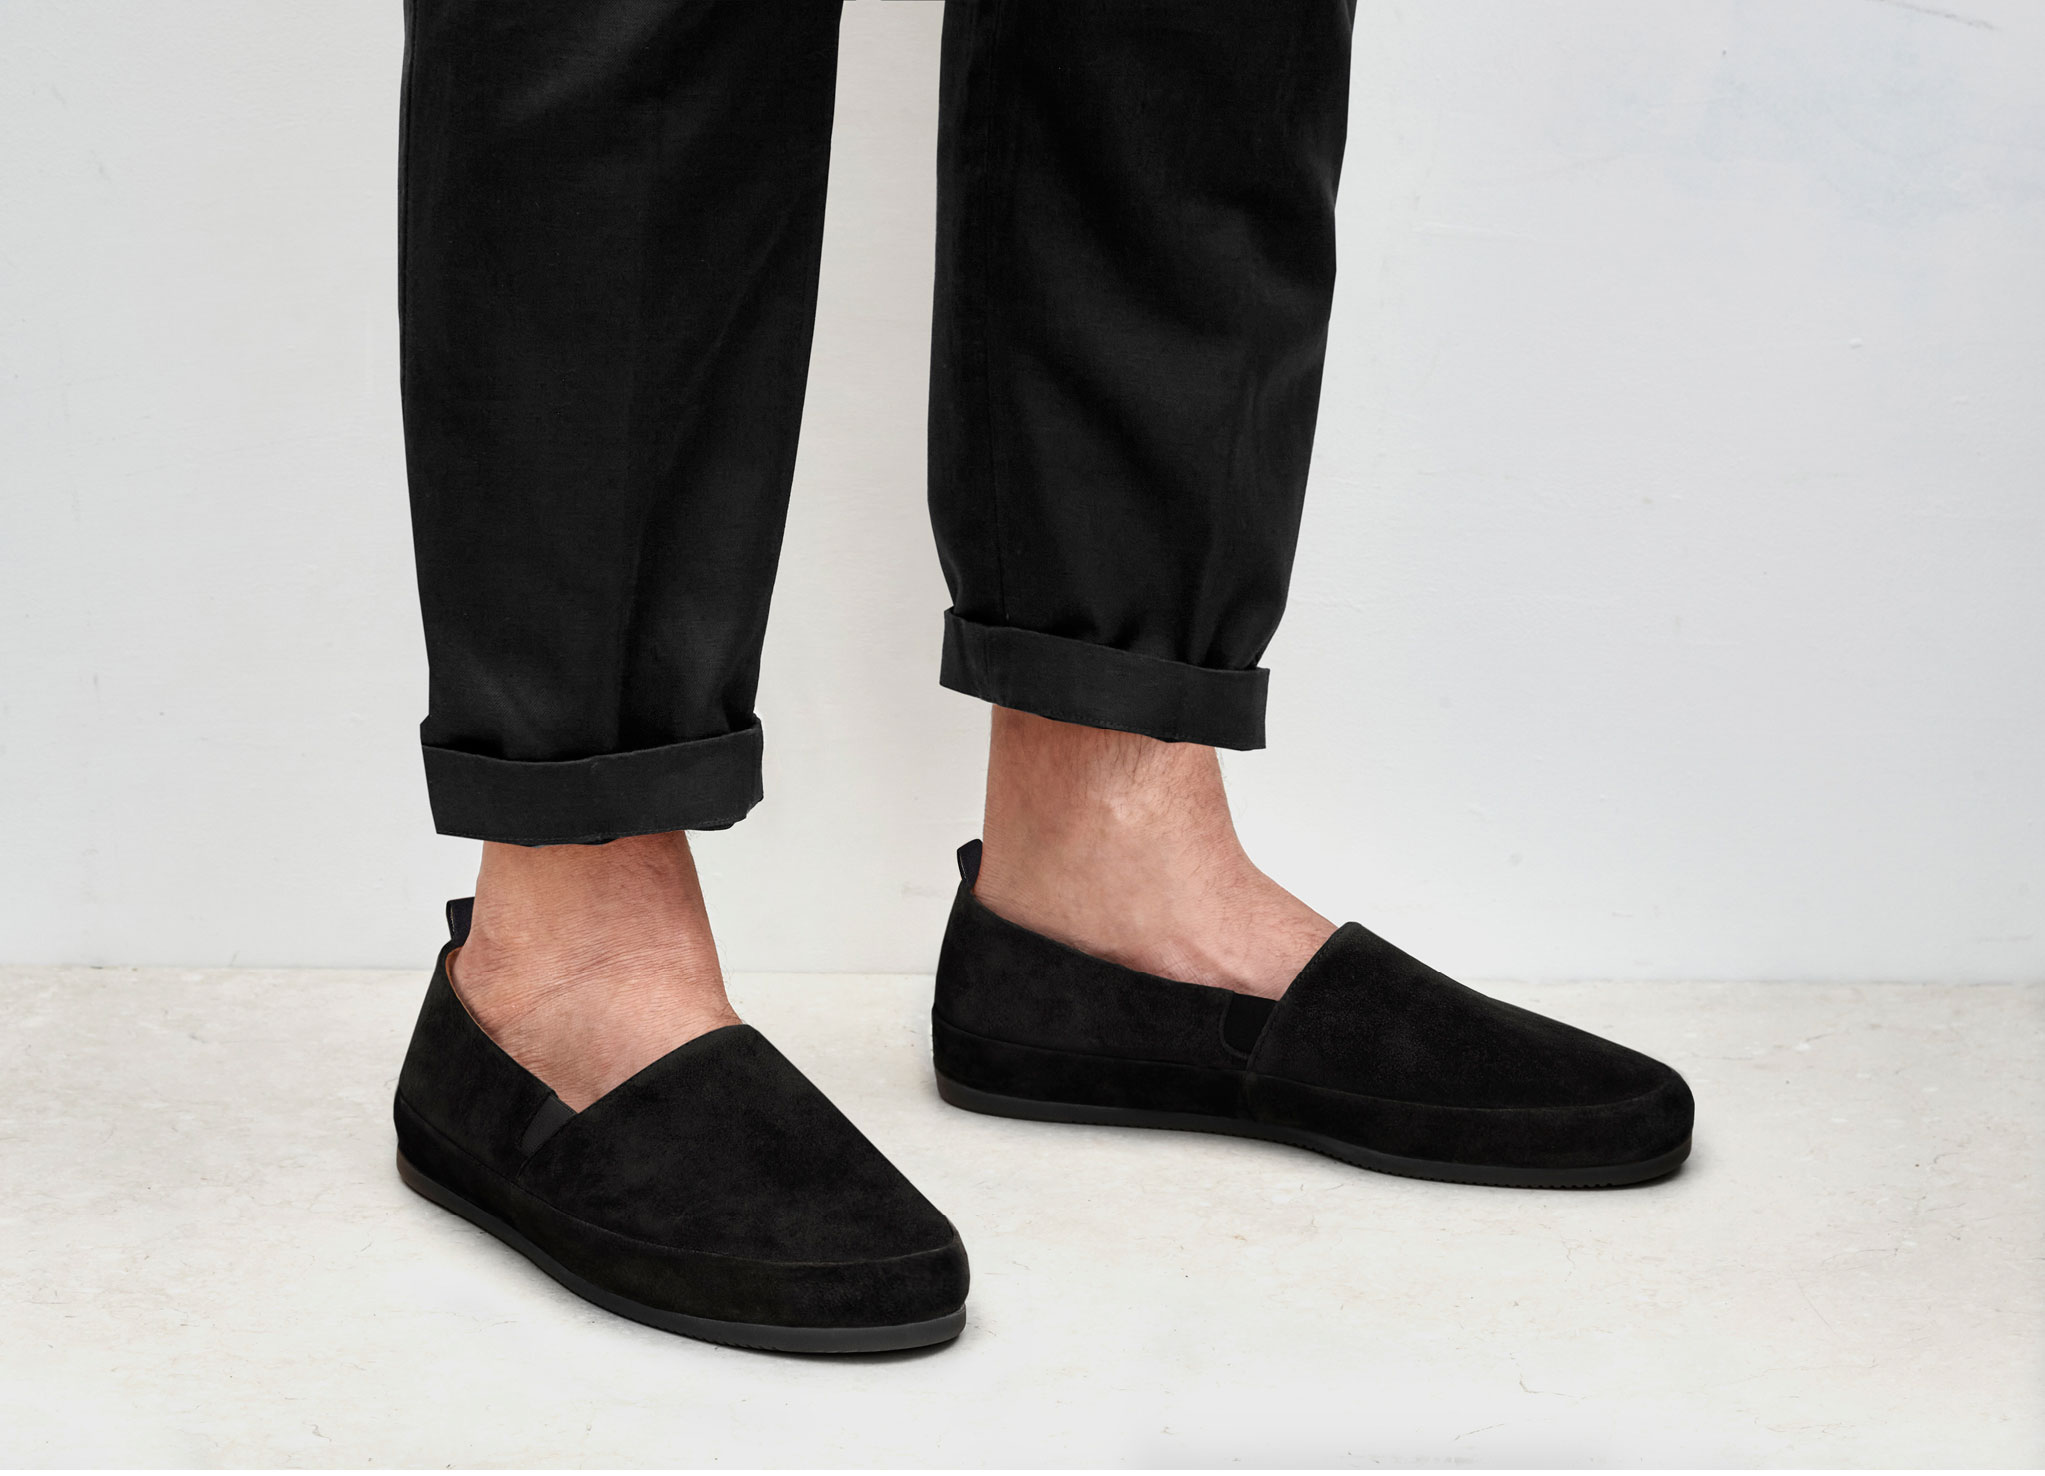 Black Loafer for Men | MULO shoes | Luxurious Italian Suede Leather